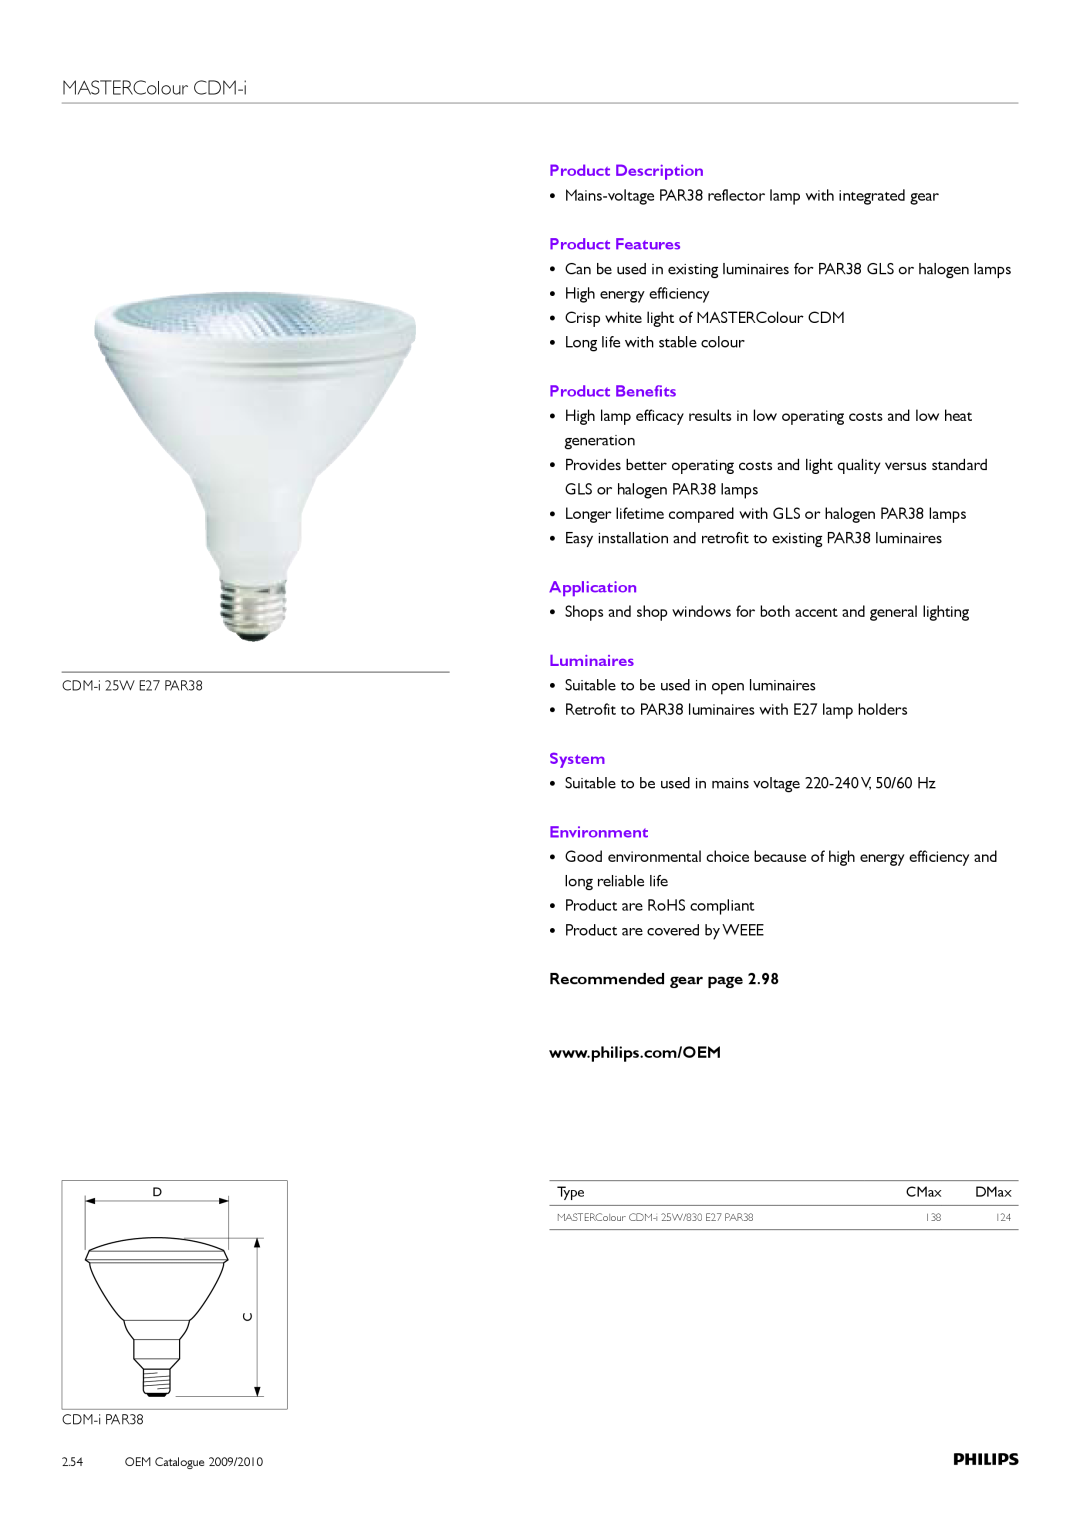 Philips Compact HID Lamp and Gear MASTERColour CDM-i, Product Description, Product Features, Product Benefits, Application 